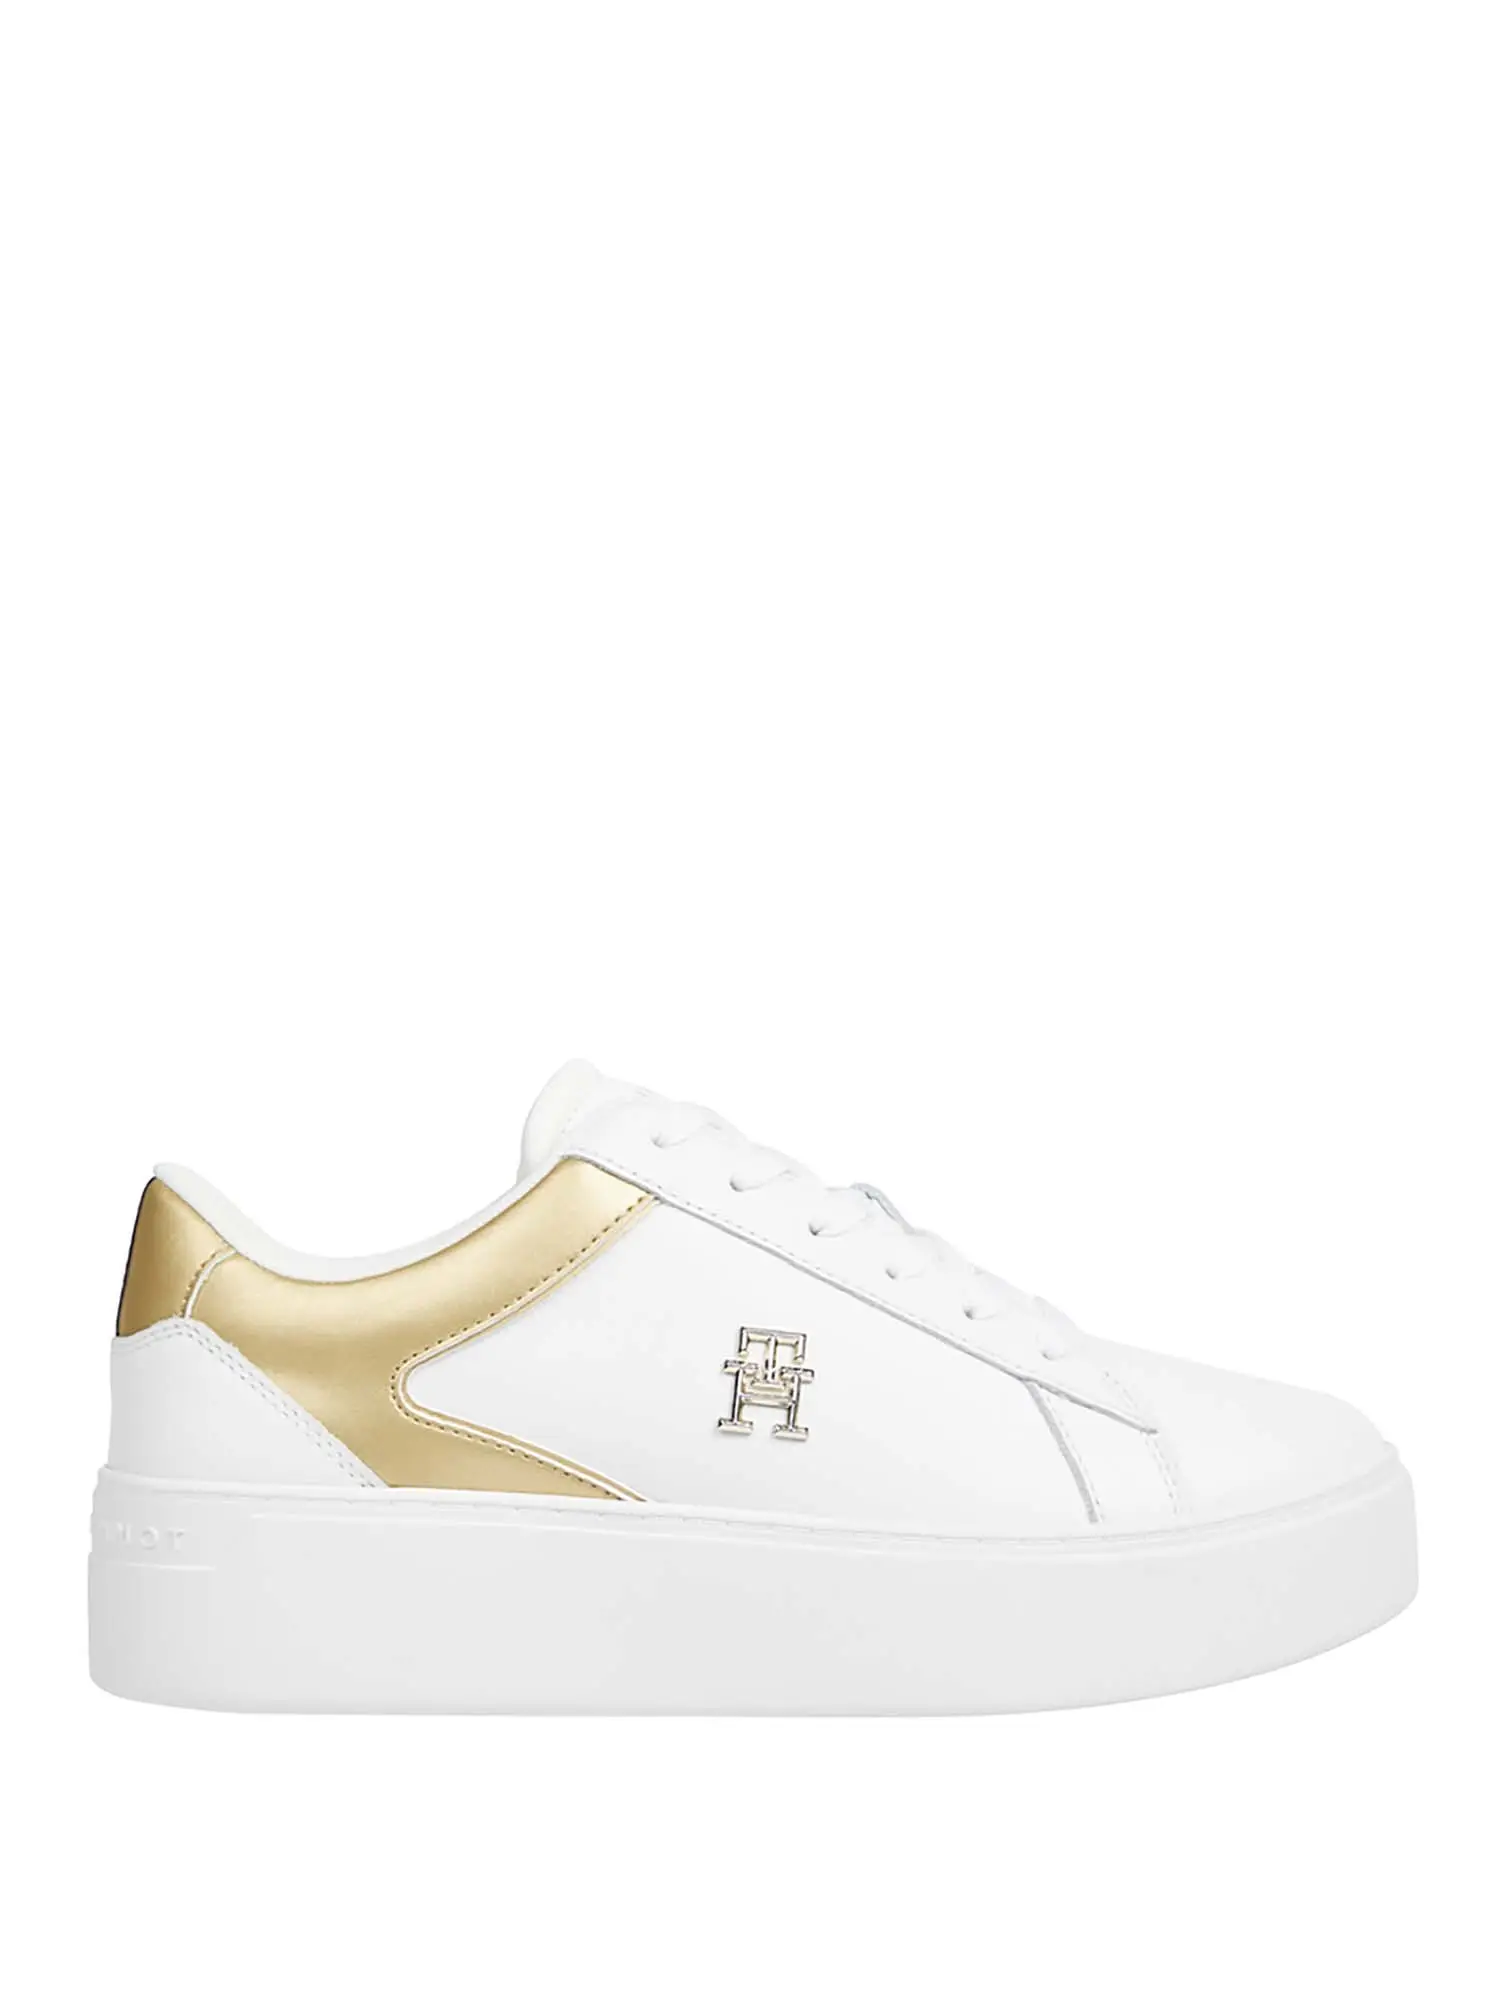 SNEAKERS DONNA - TOMMY HILFIGER - FW0FW08073 - BIANCO/ORO, 41